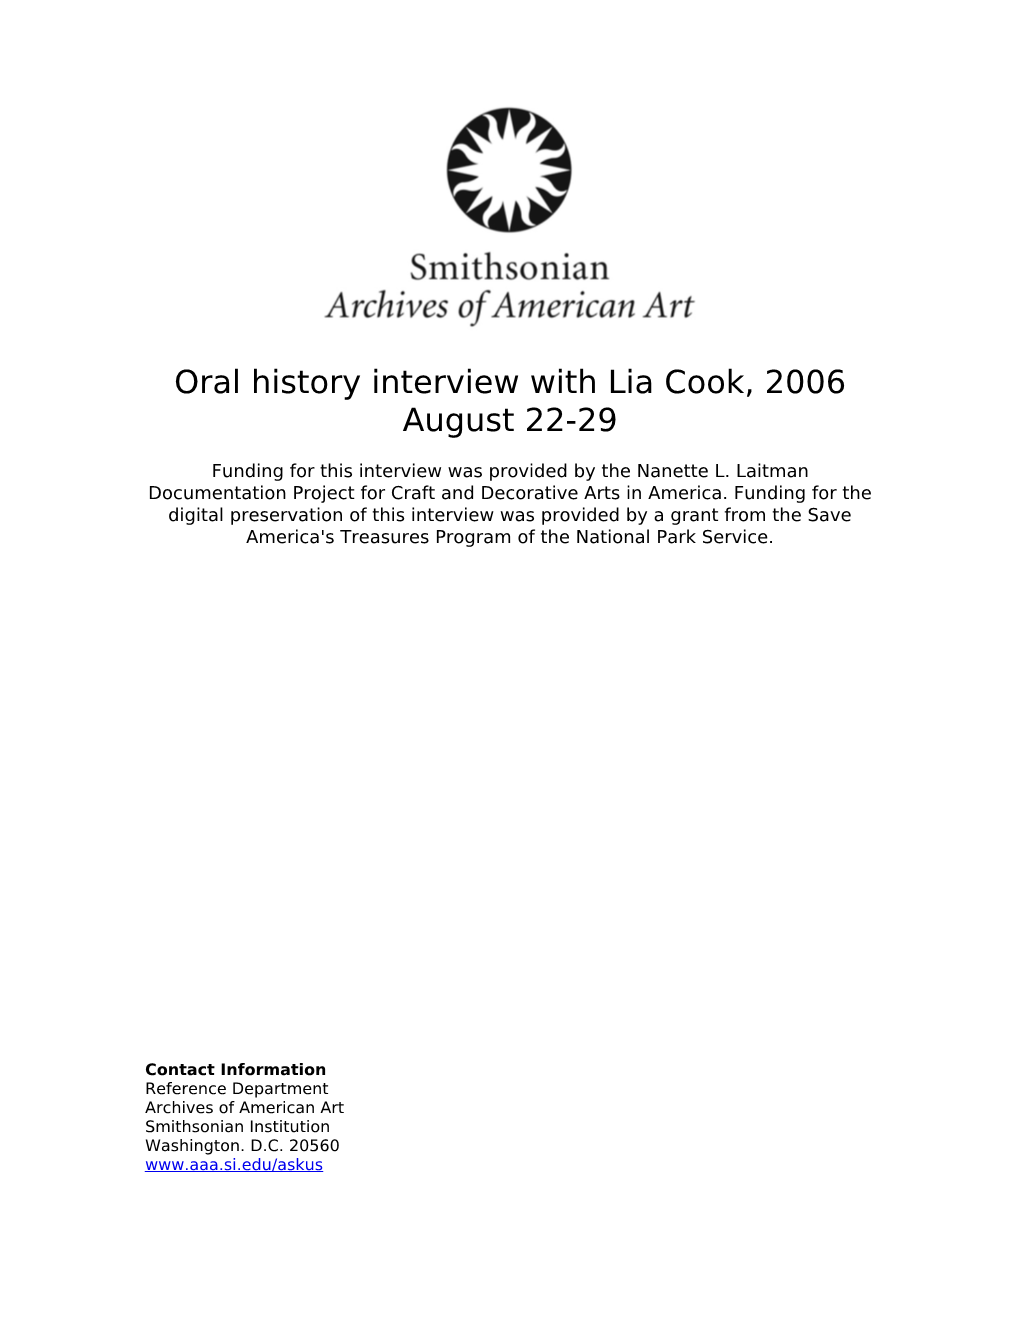 Oral History Interview with Lia Cook, 2006 August 22-29